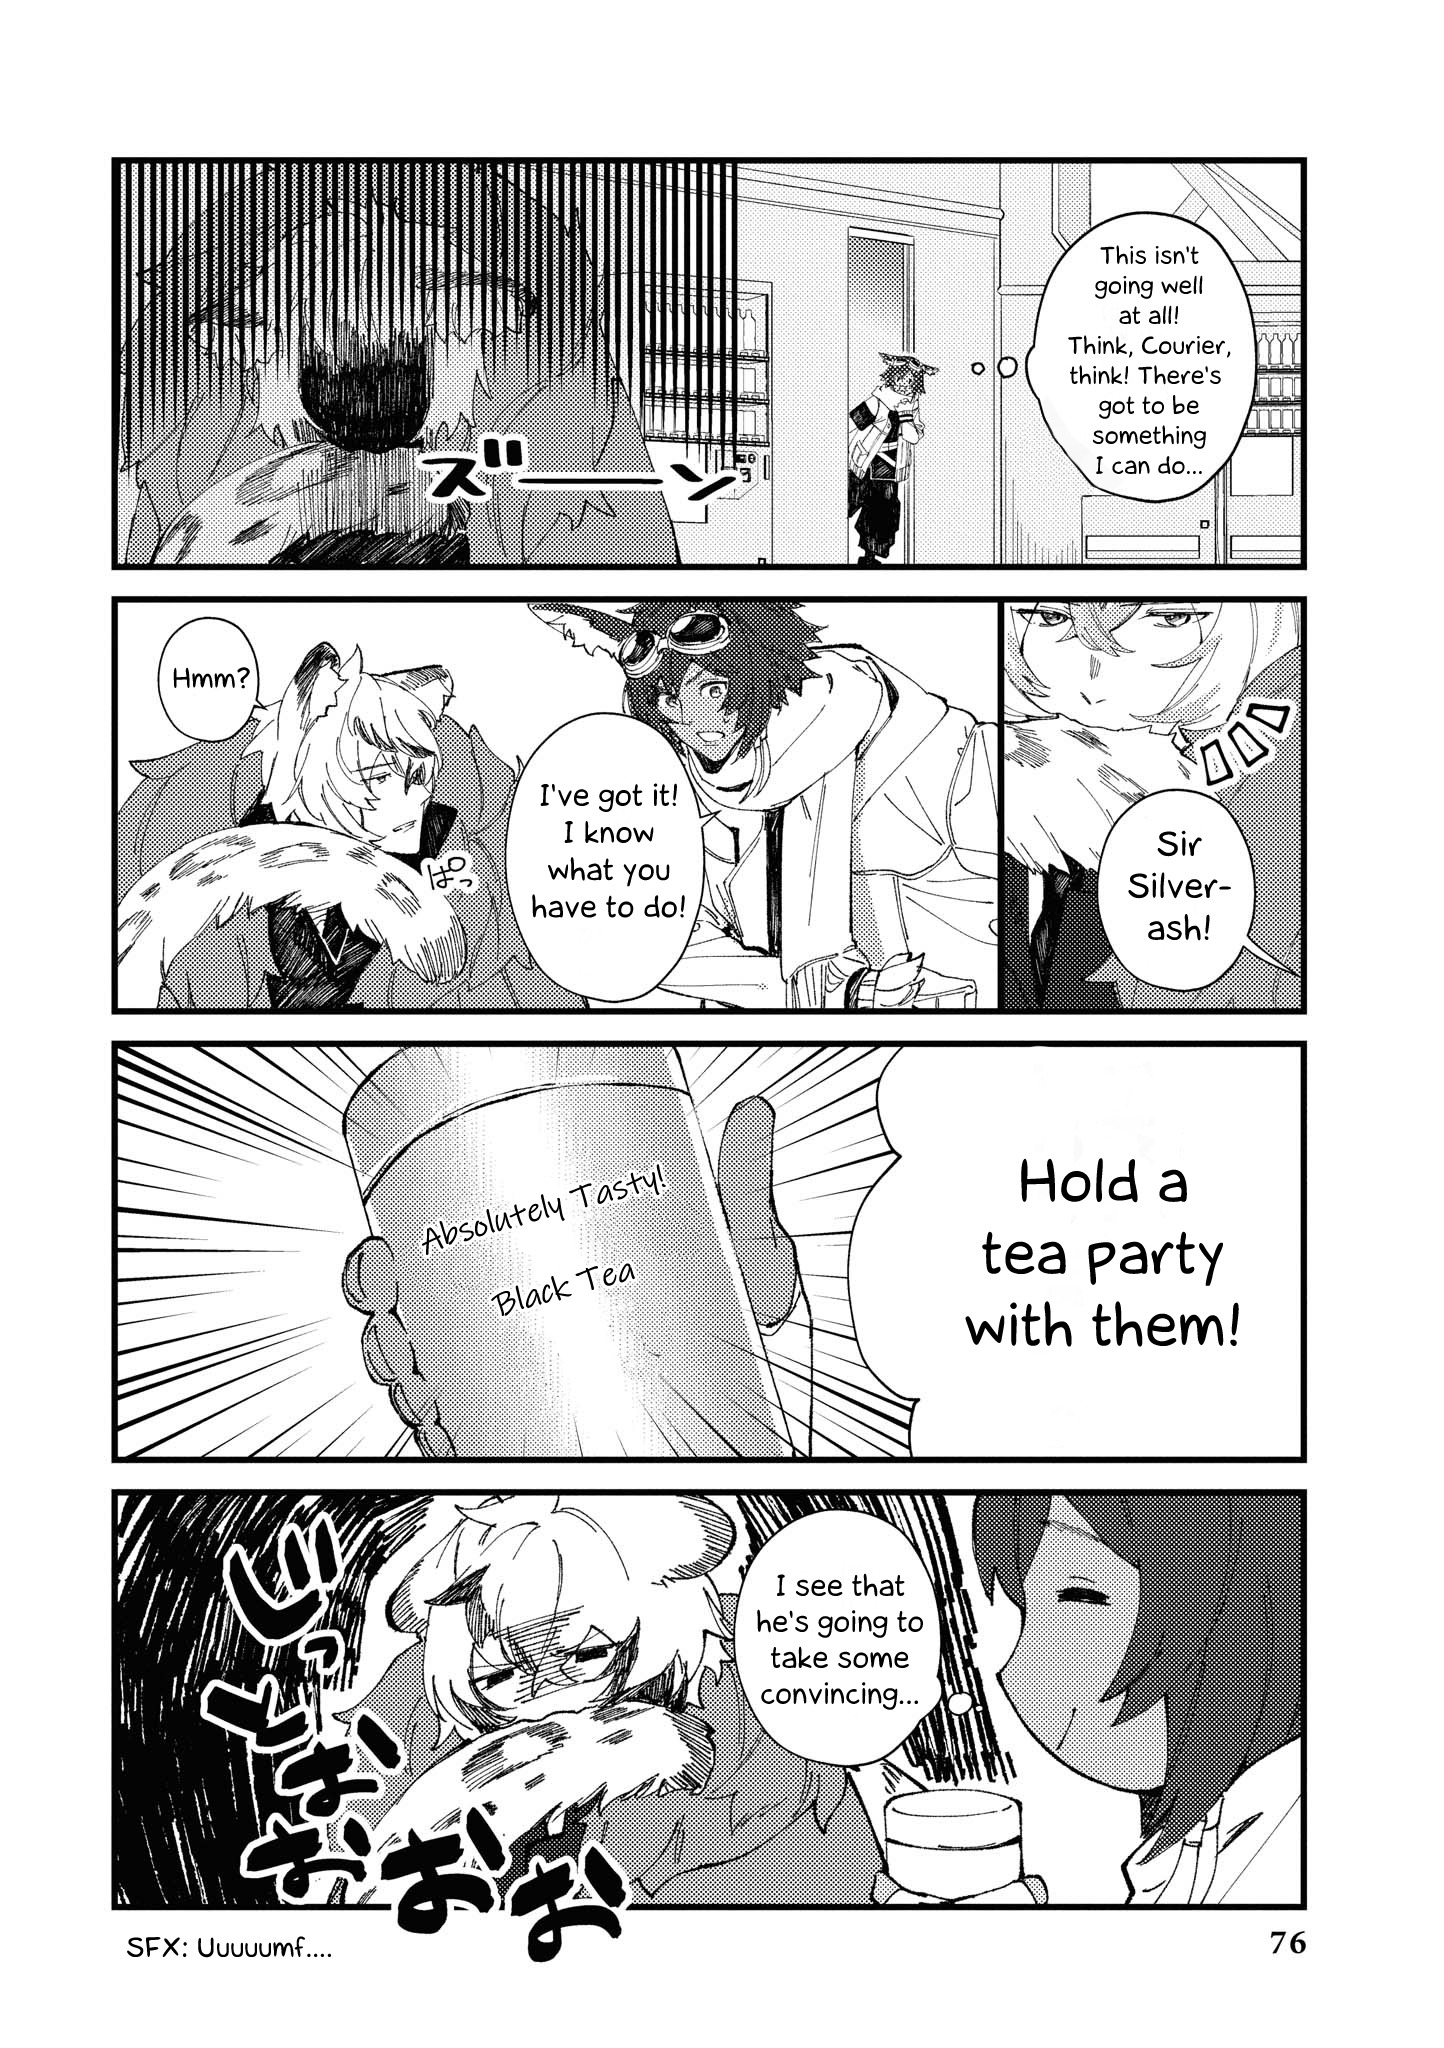 Arknights Comic Anthology vol.1 ch.7